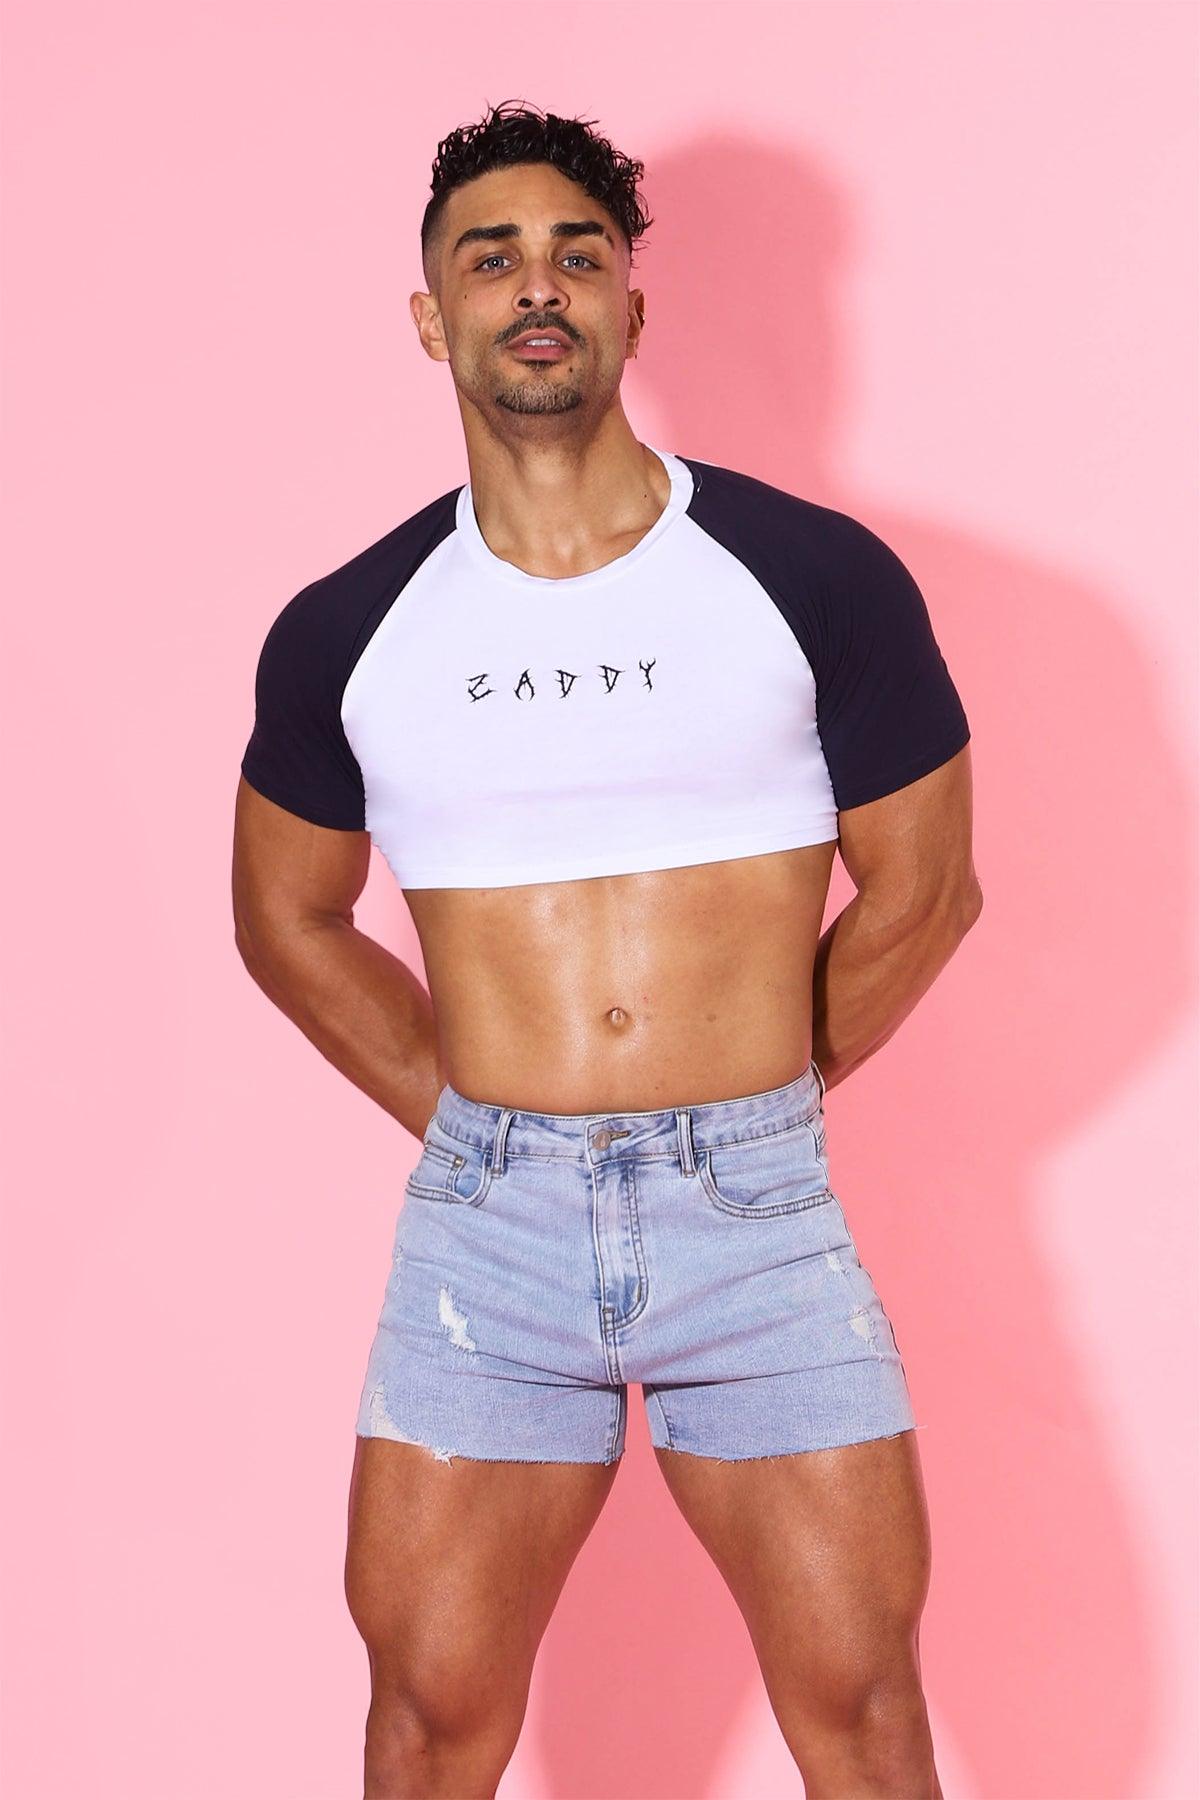 Men's Fitted Crop Top - Zaddy